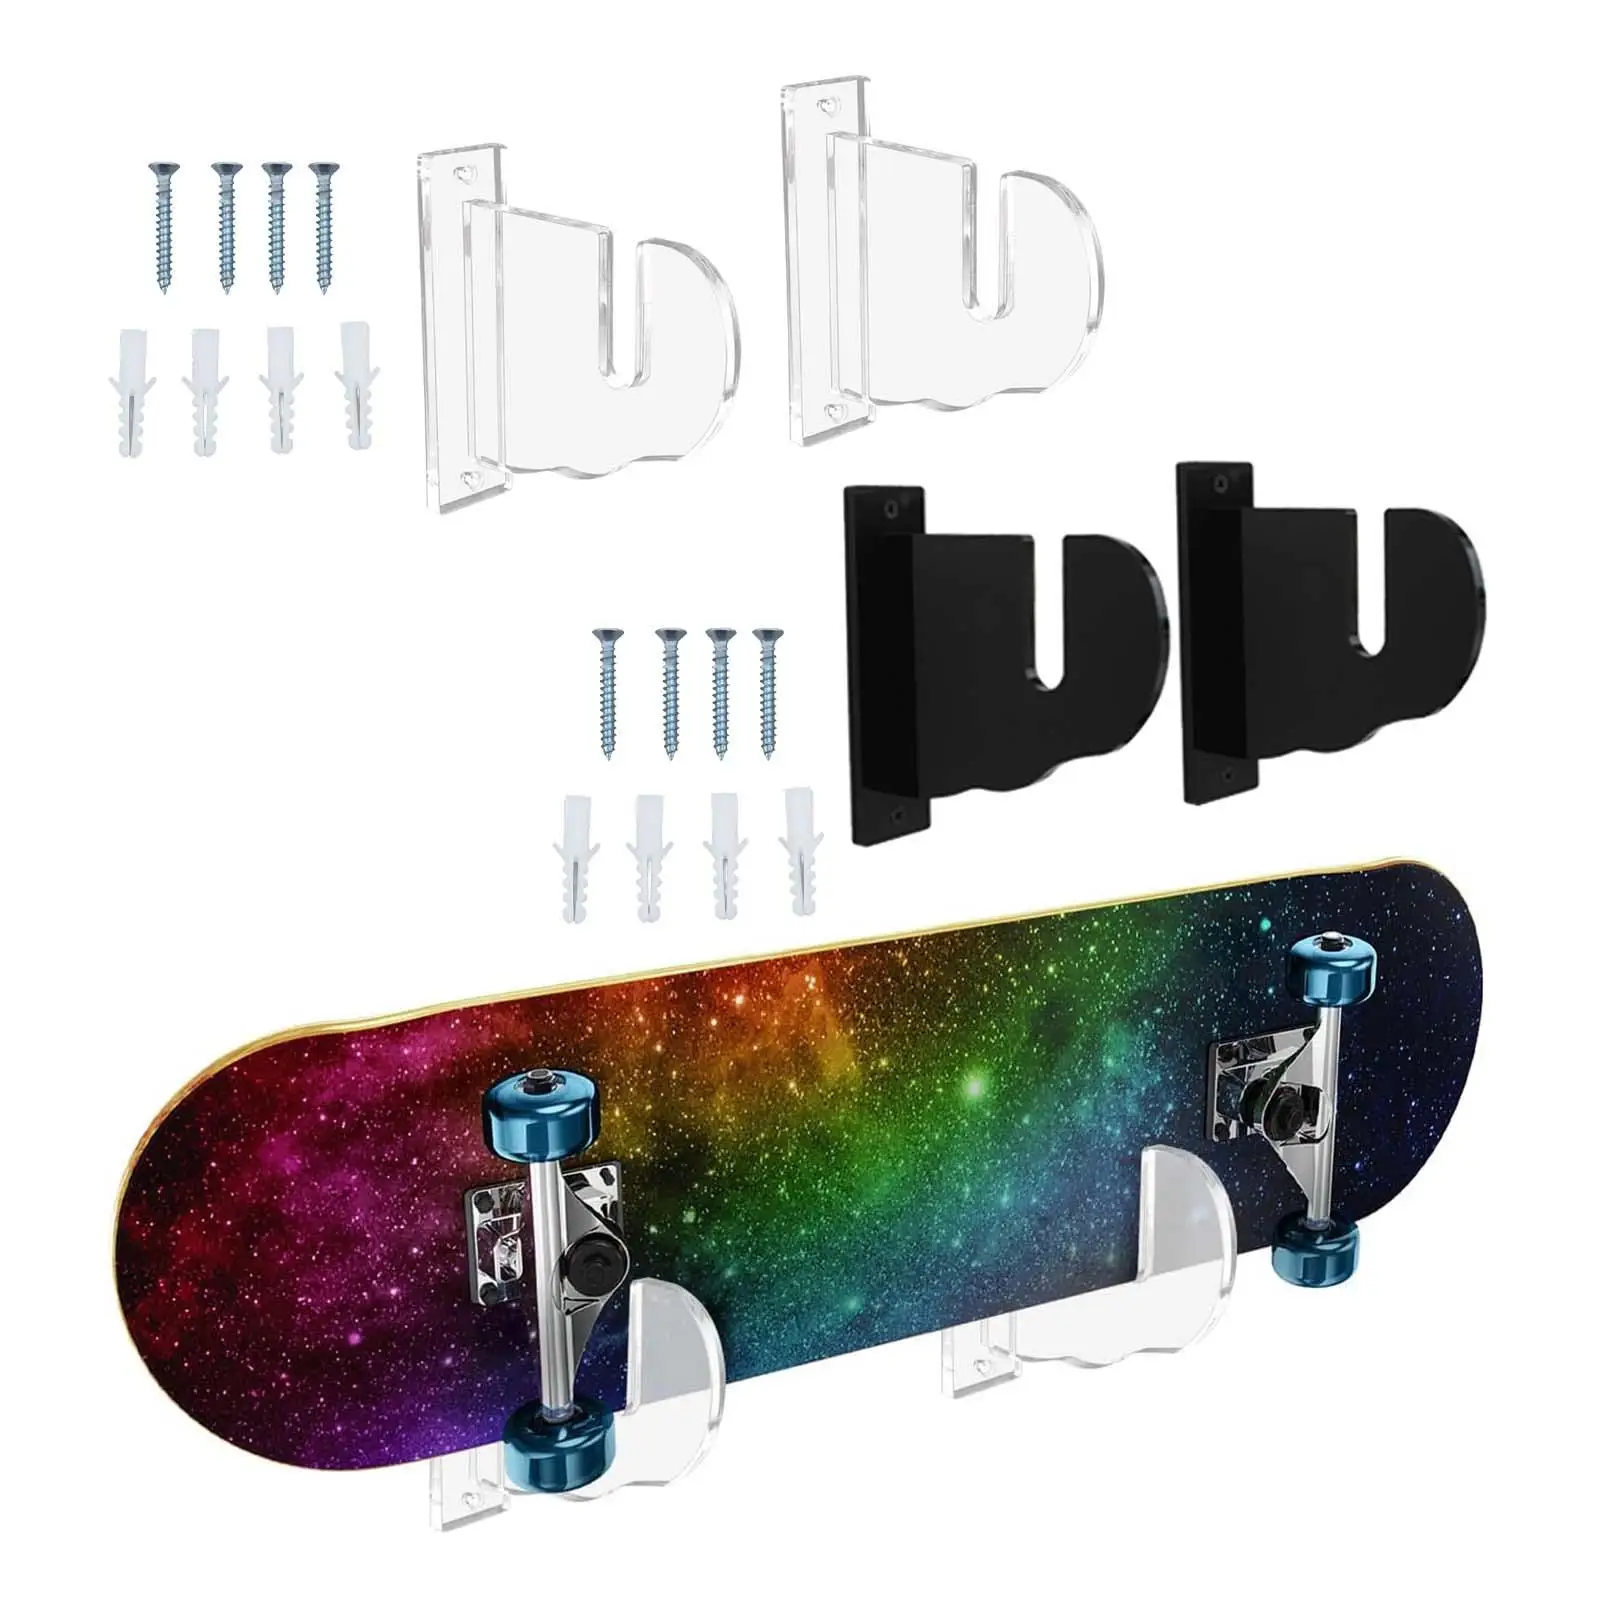 

Skateboard Wall Mount Easily Install Multifunctional Skateboard Hanger for Penny Boards Accessories Cruisers Long Boards Garage